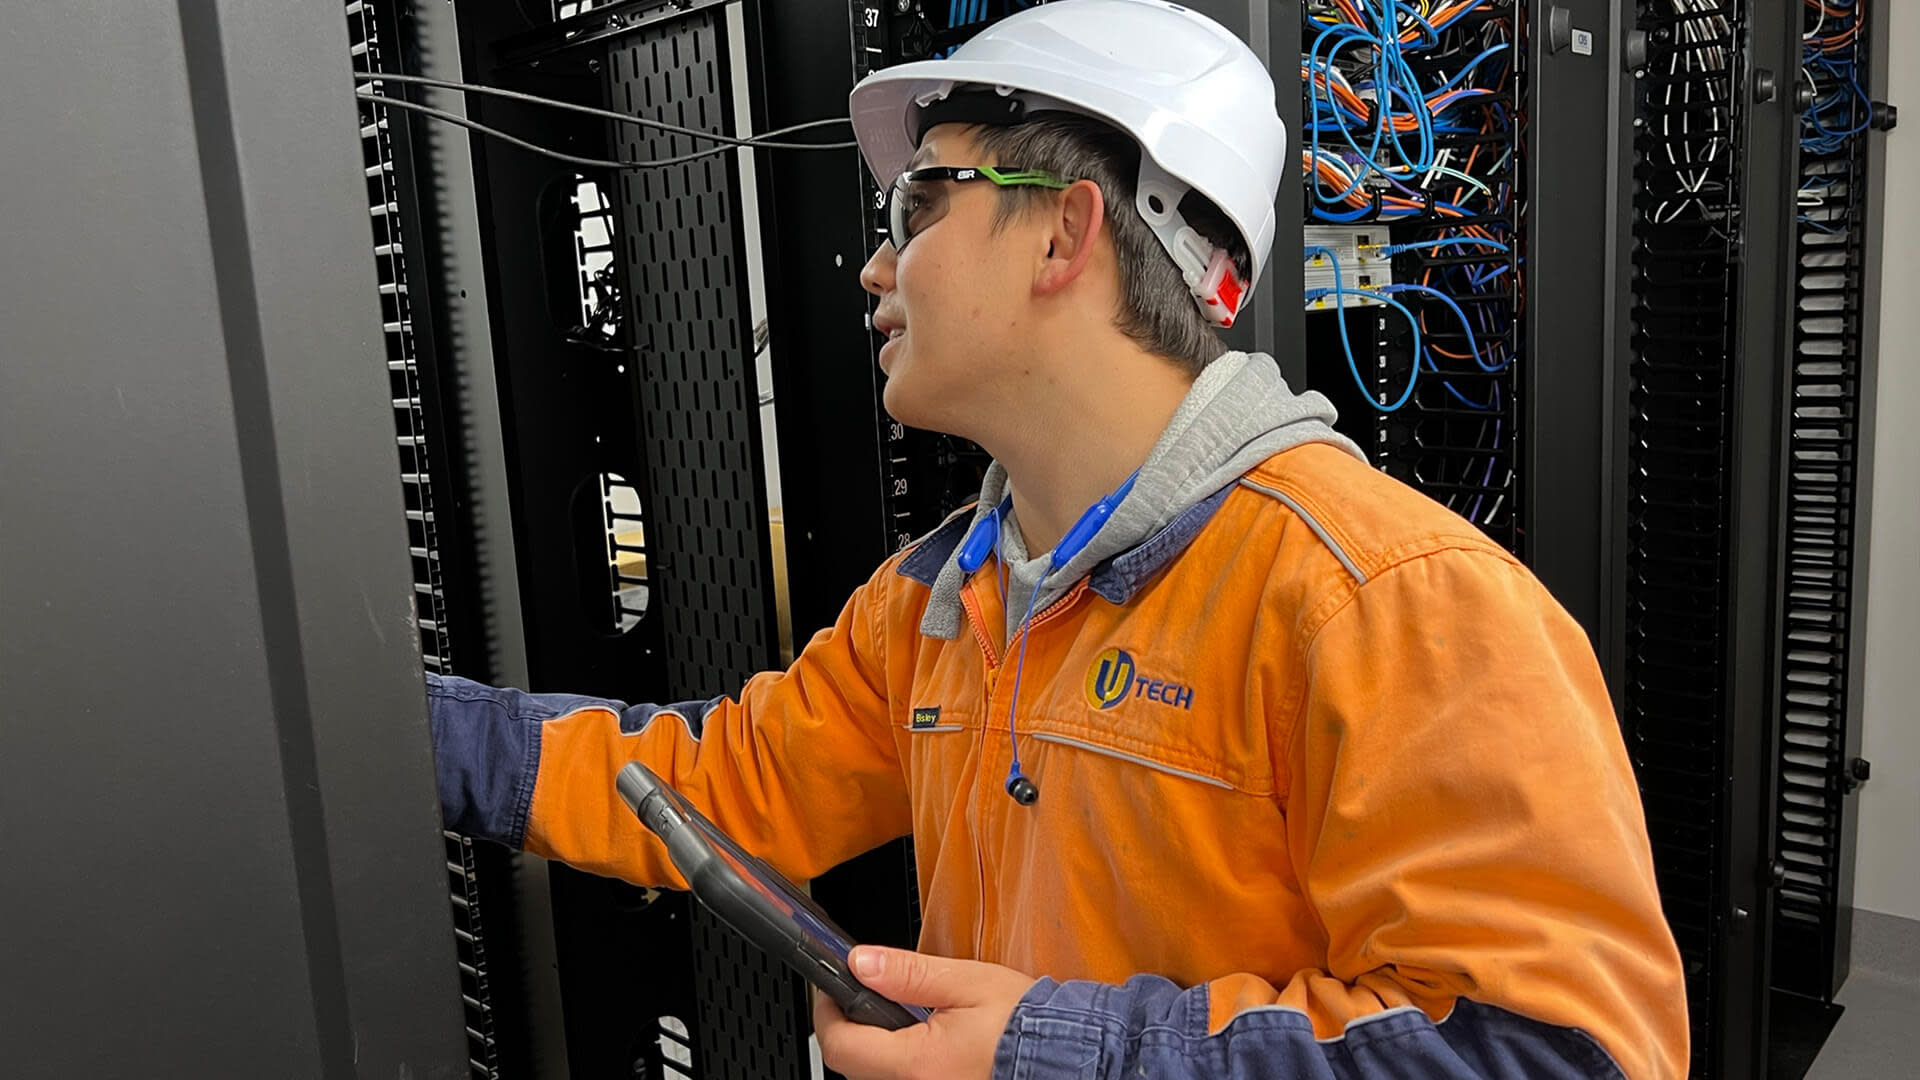 Utech subcontractor checking cables in wiring cabinet